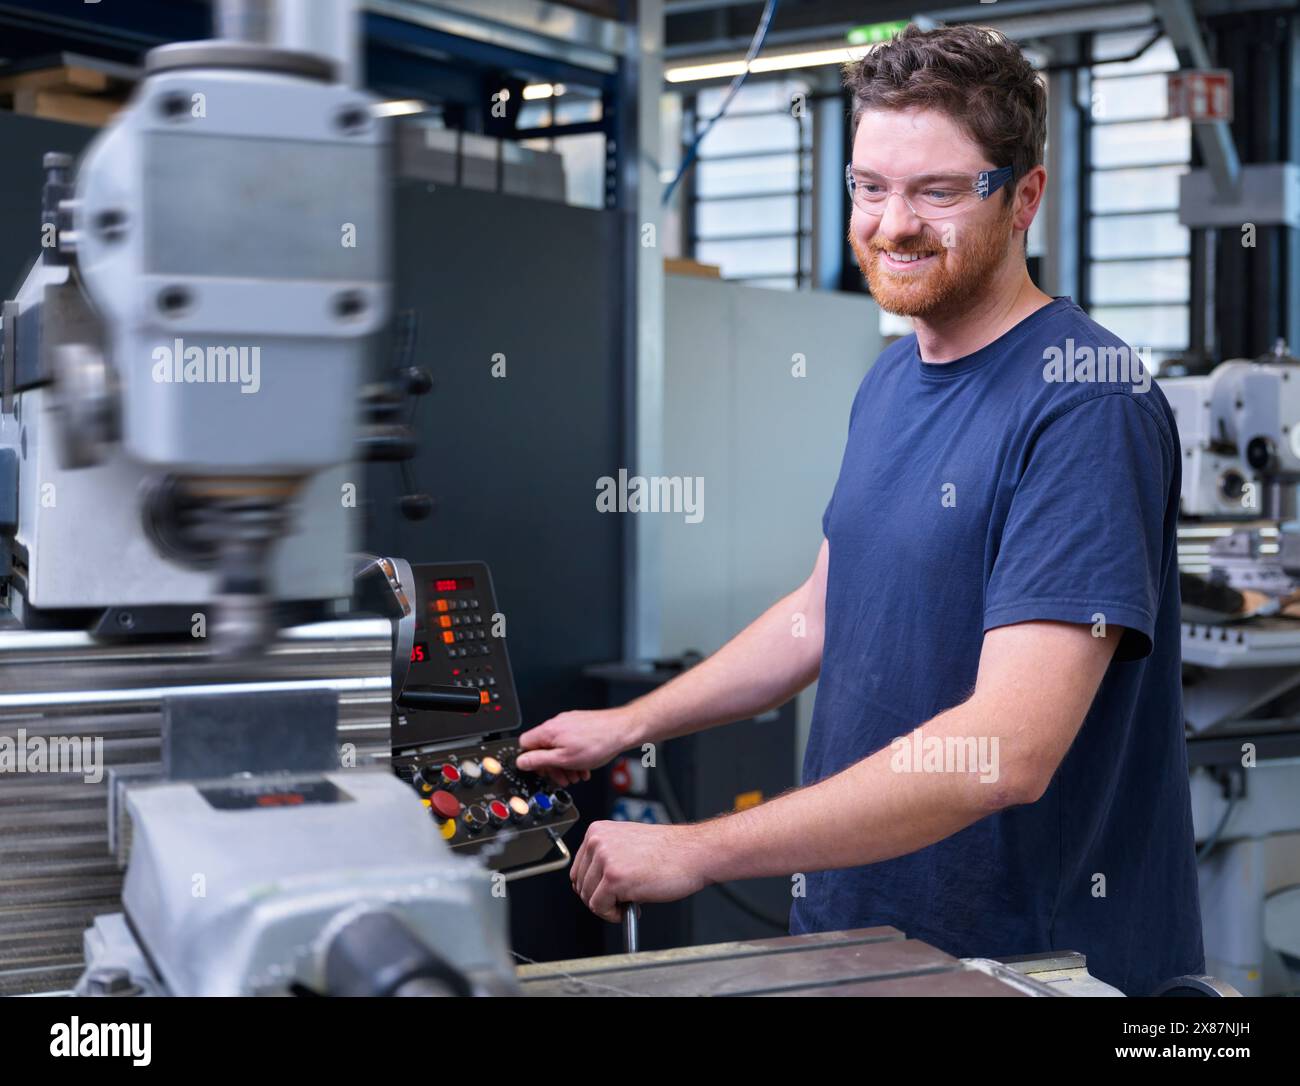 Smiling engineer in blue t-shirt operating CNC machine at factory Stock Photo